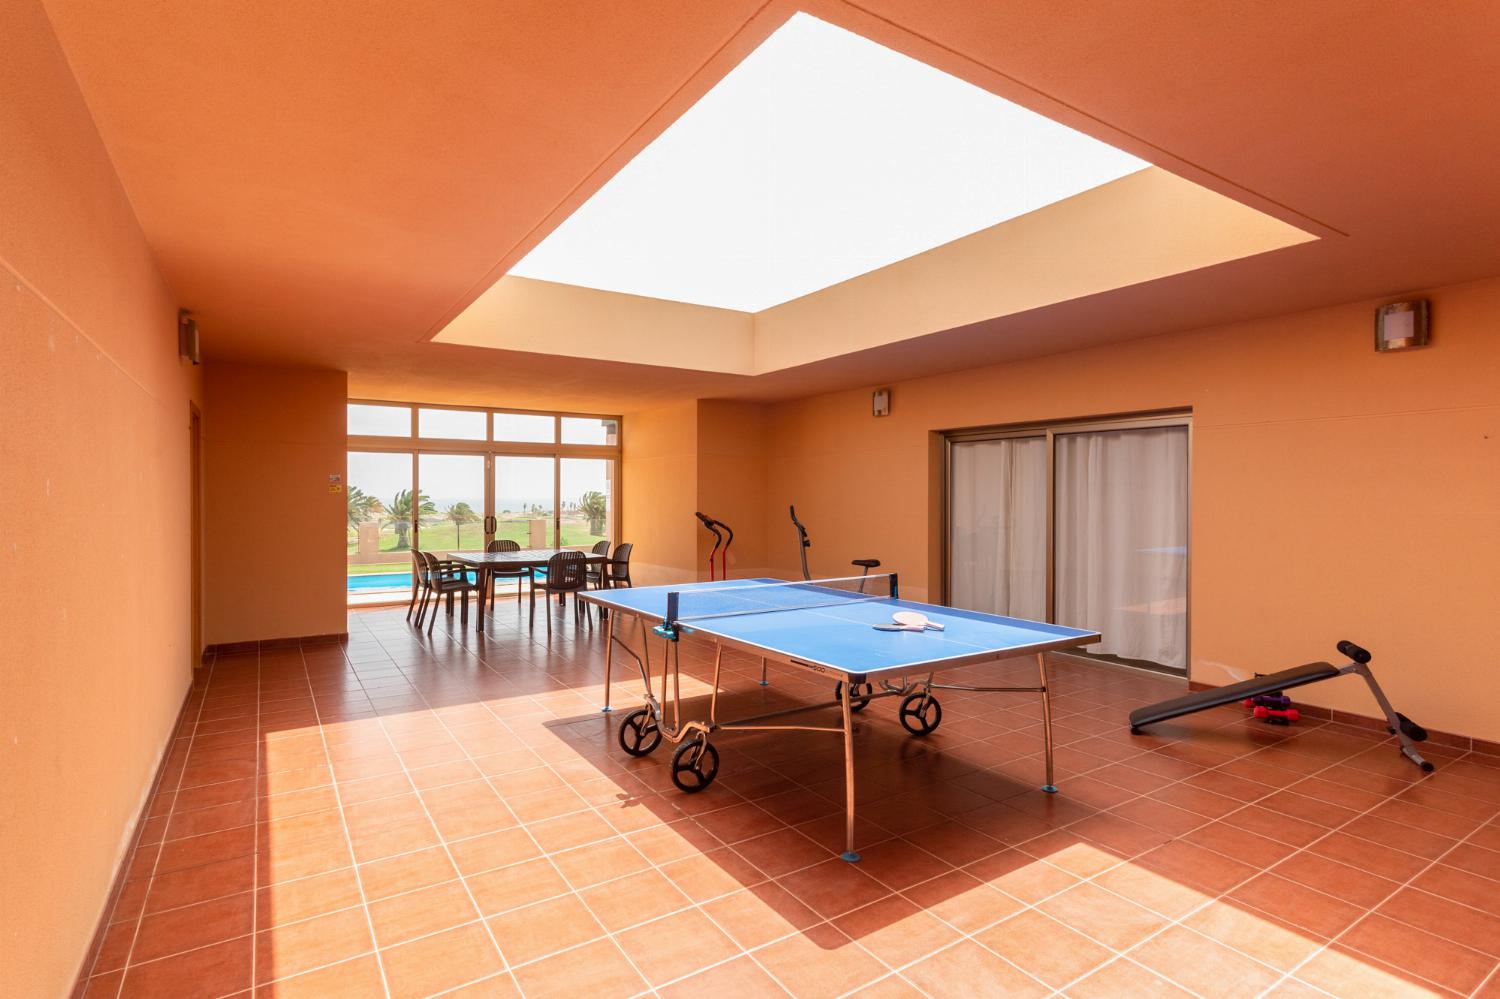 Ping pong table and gym area